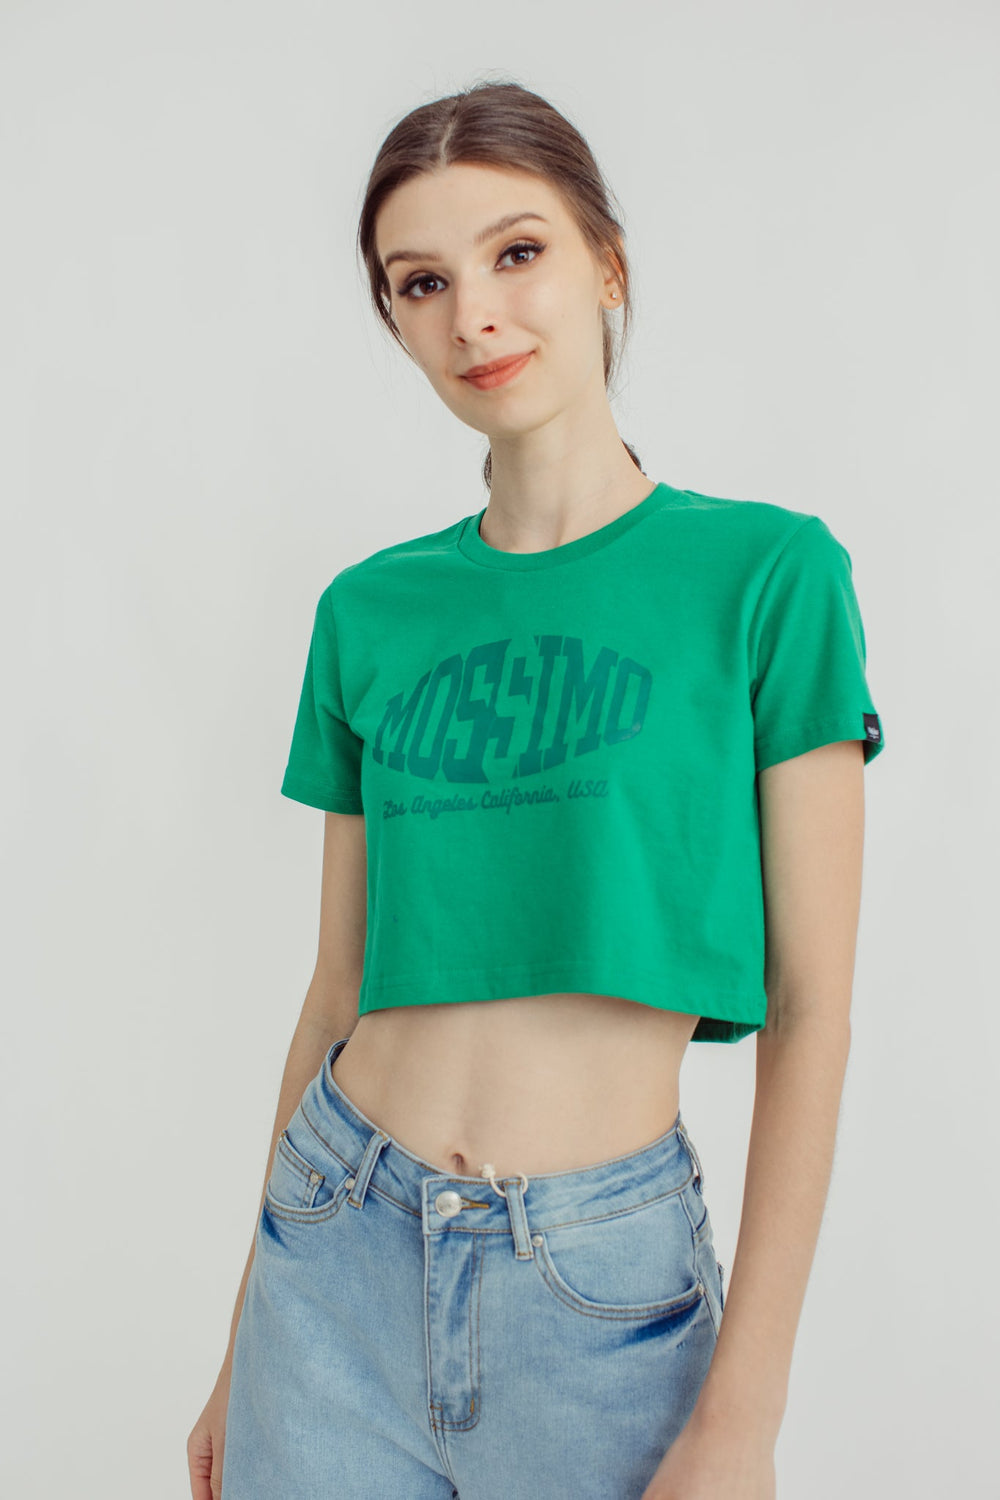 Jellybean with Mossimo Los Angeles Cali, USA Vintage Cropped Fit Tee - Mossimo PH